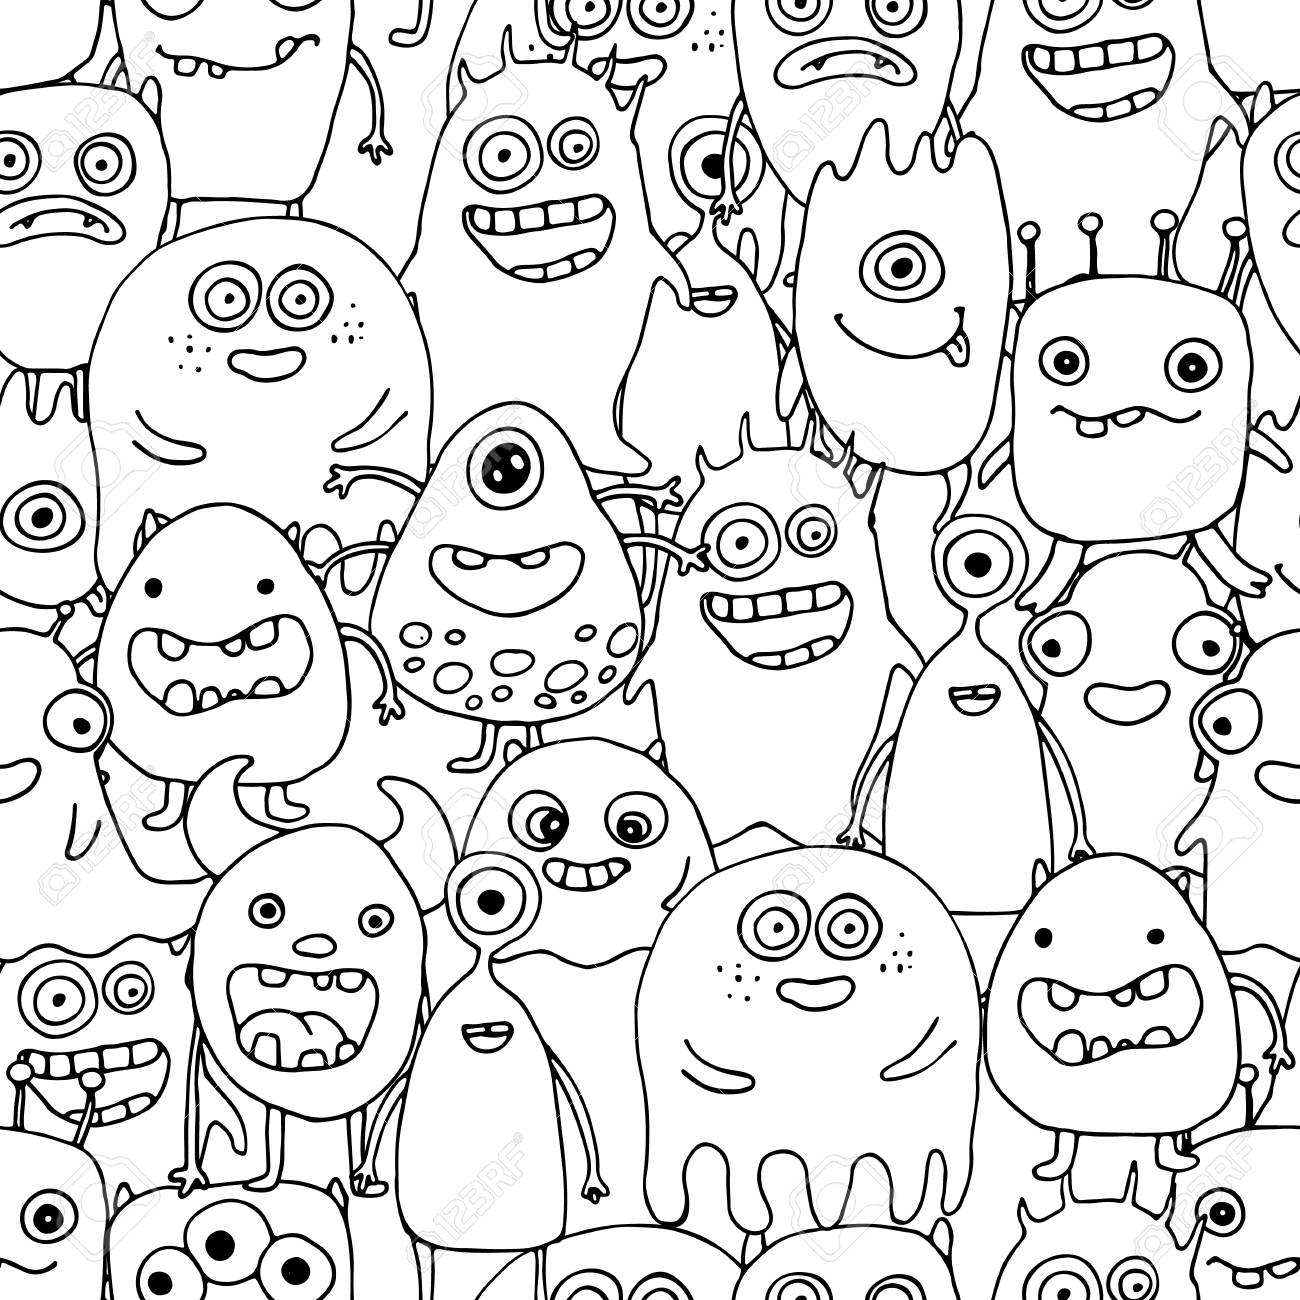 Free Coloring Page Monster Free Printable Monster Coloring Pages For 